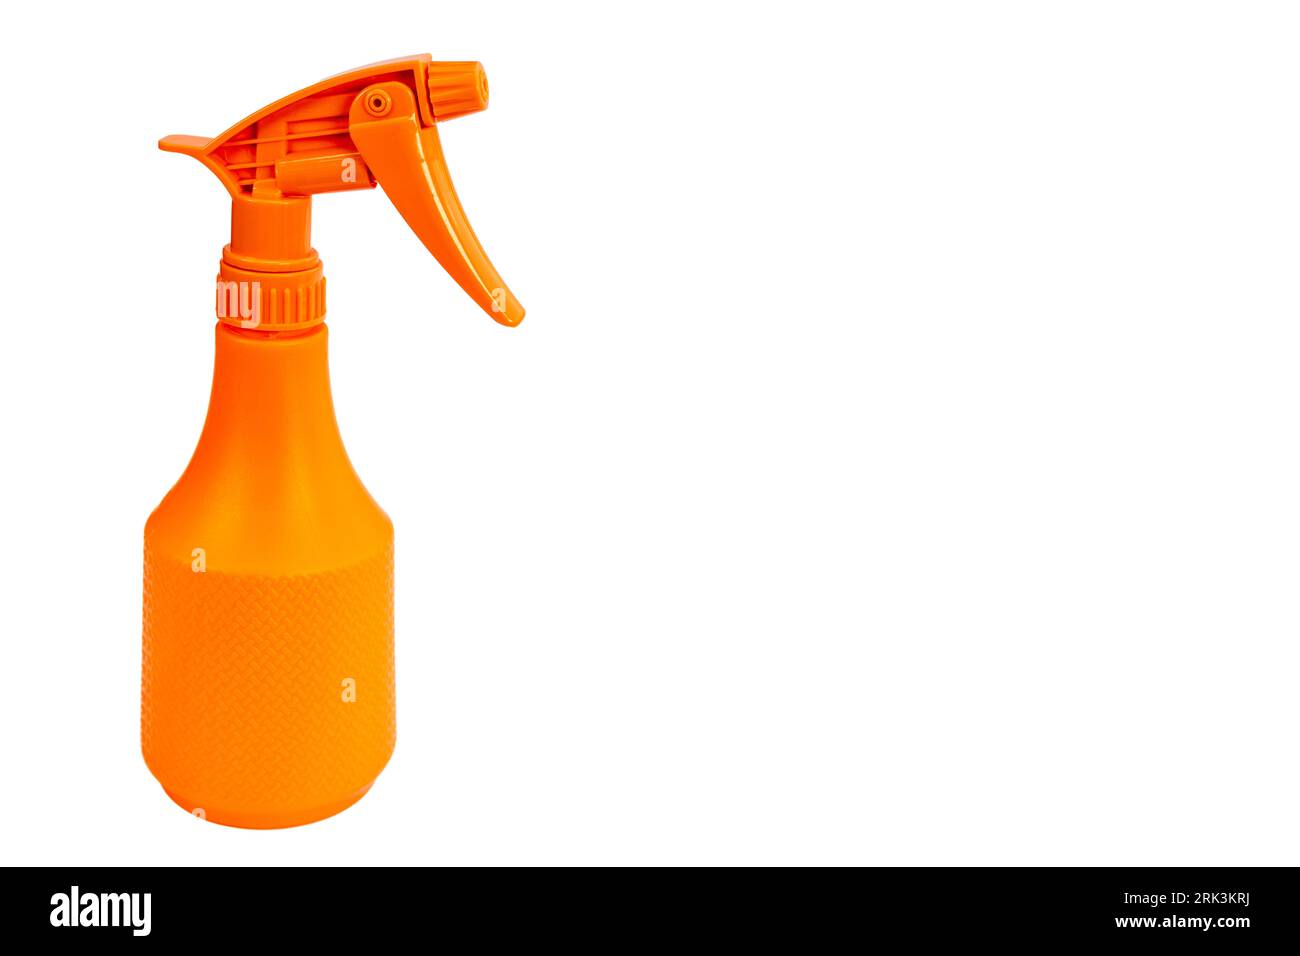 Sprayer isolated on white background with copy space Stock Photo